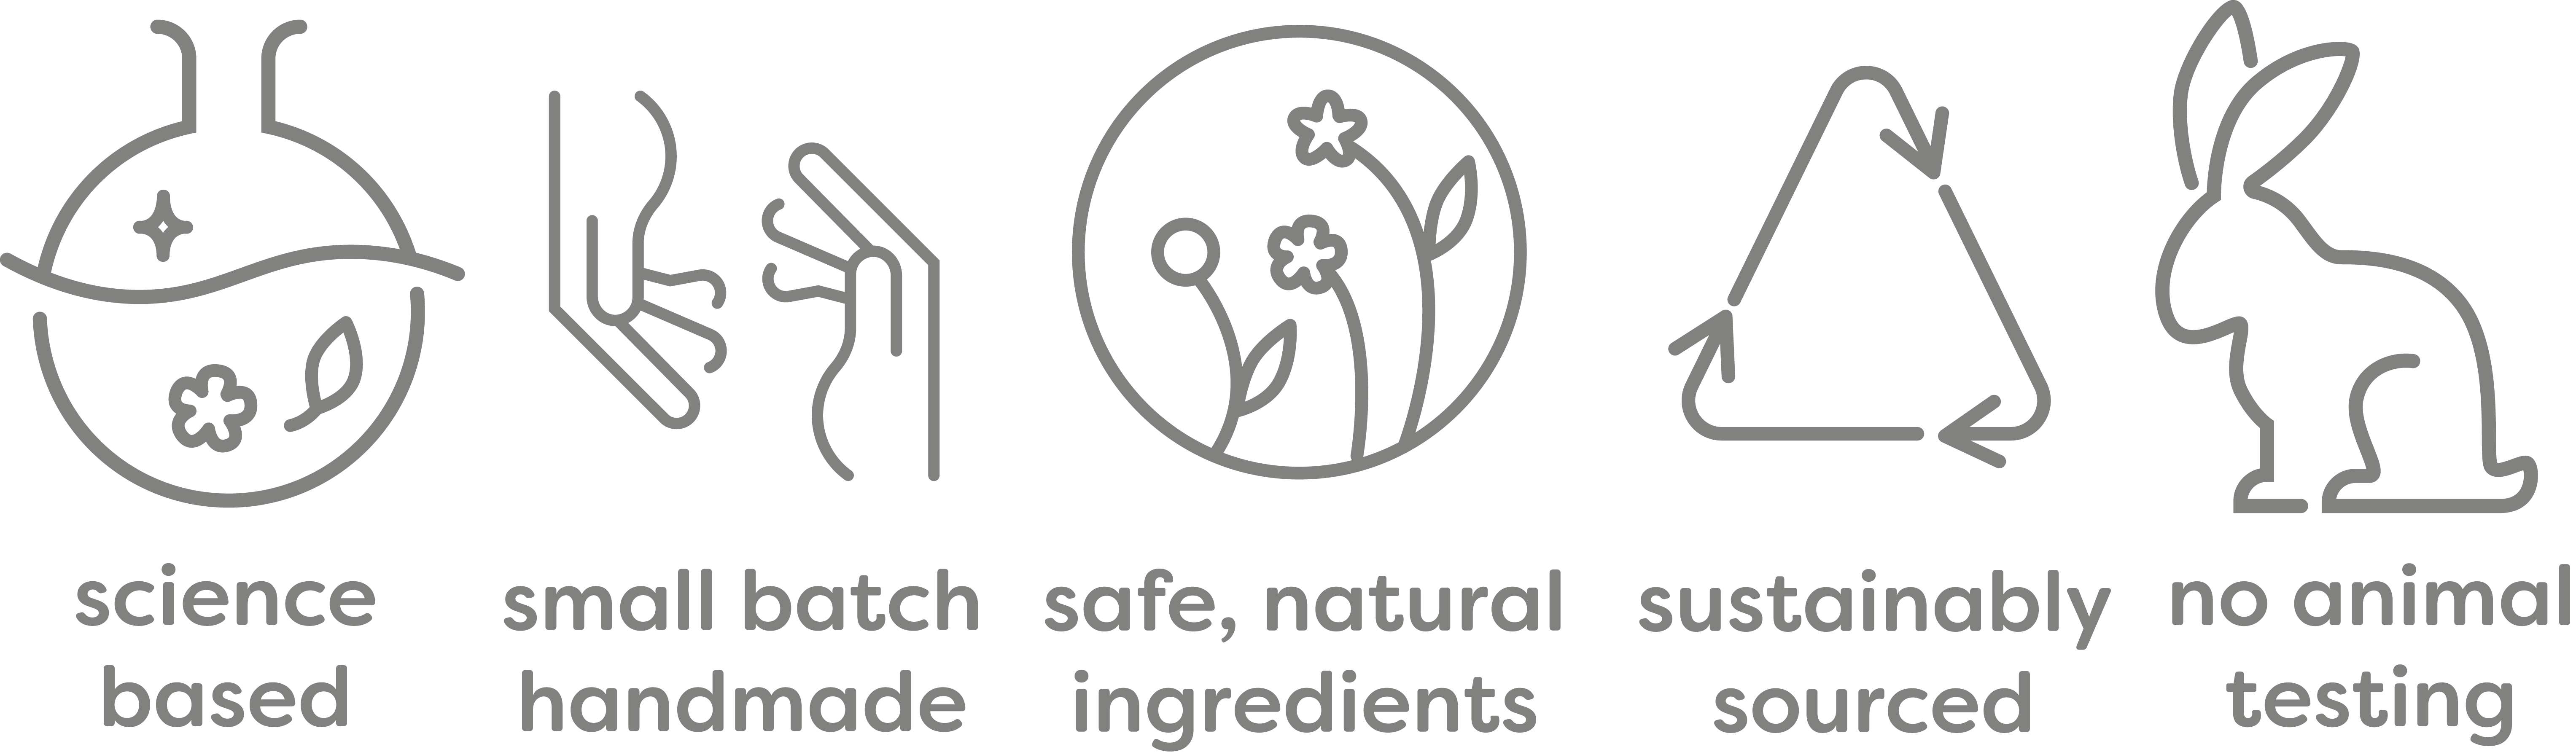 Science based, small batch, handmade, safe, natural ingredients, sustainably sourced, no animal testing